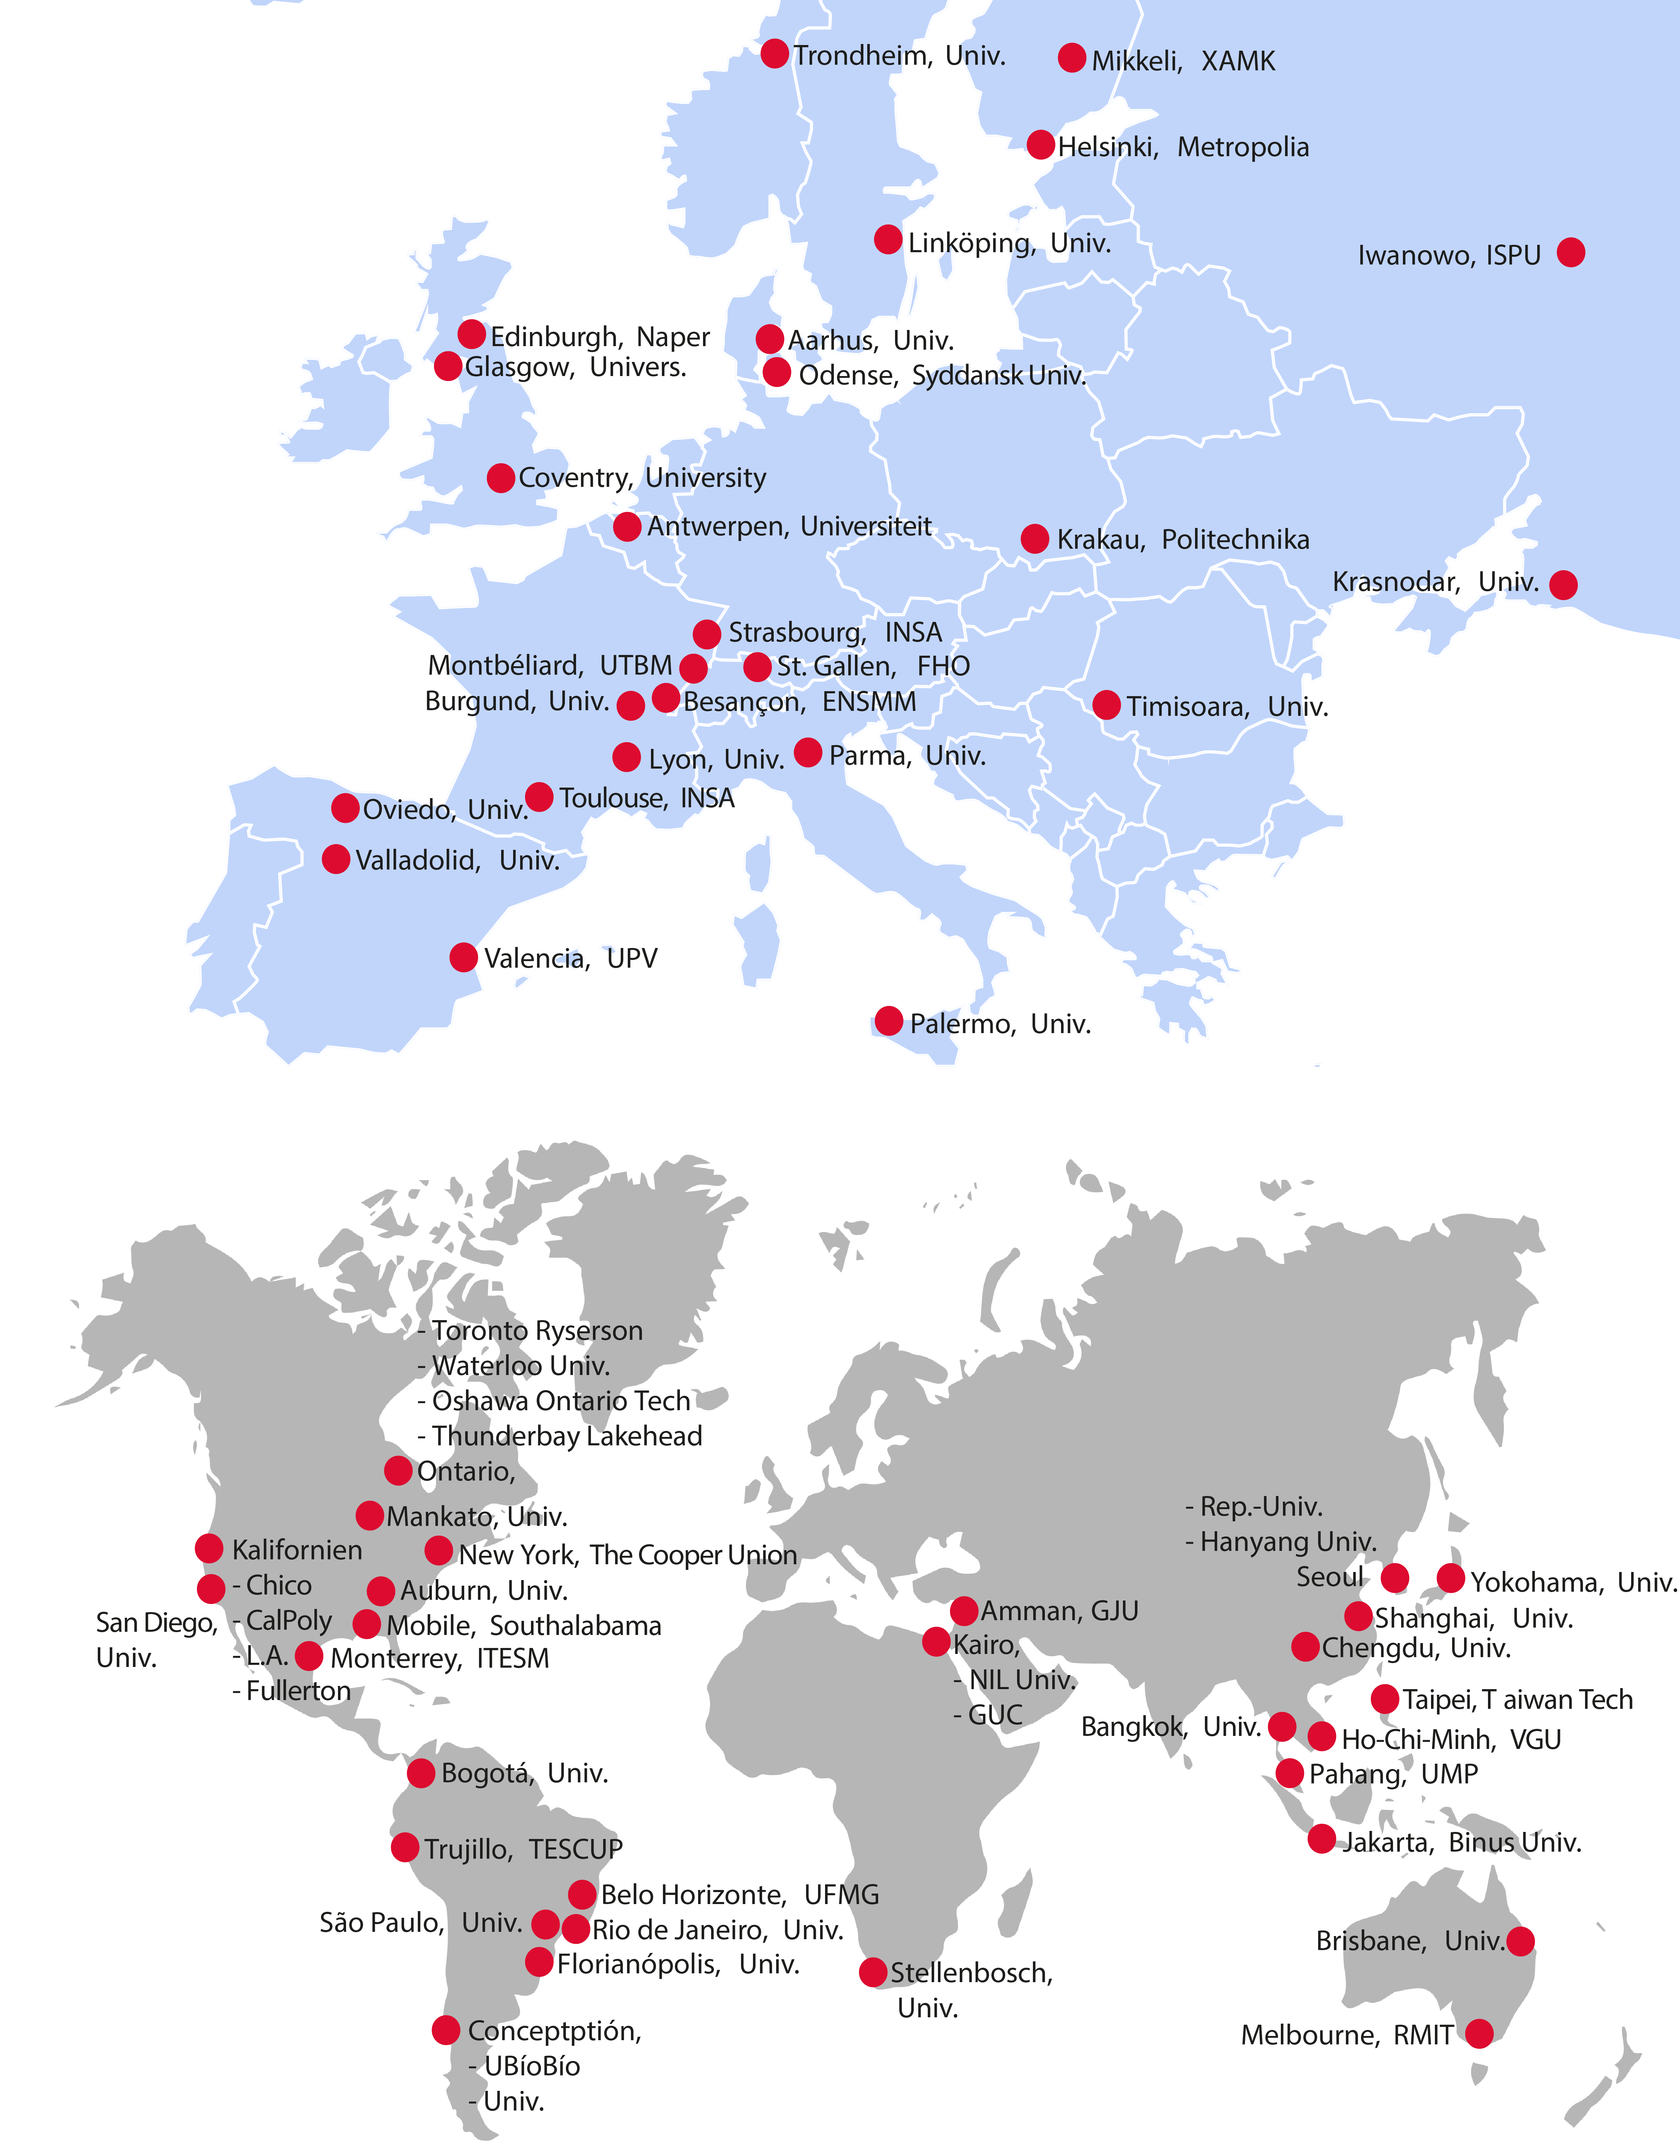 maps of Europe and of the world, with red dots marking partner universities